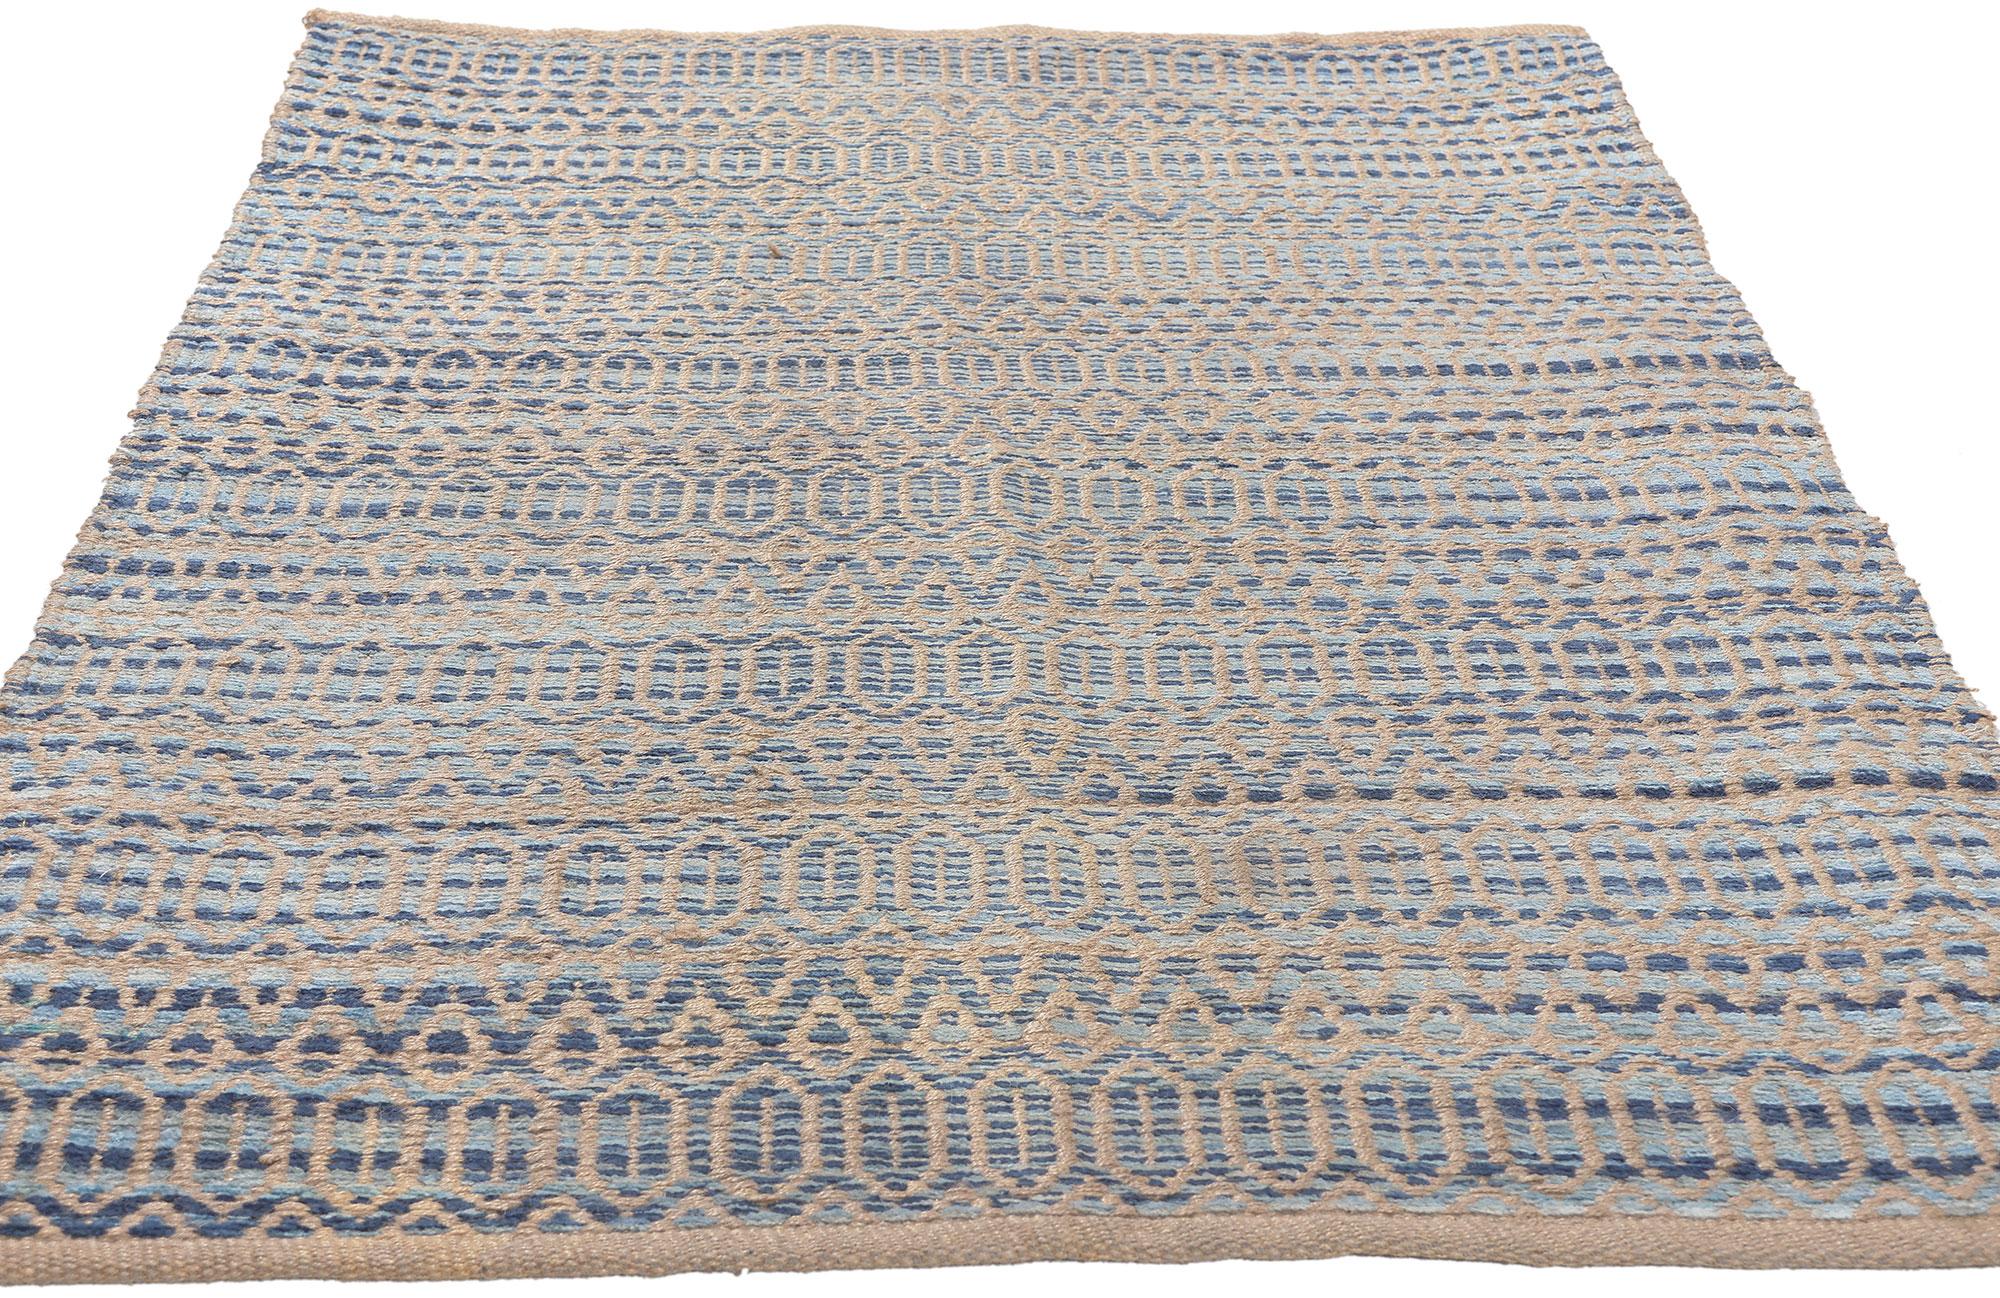 Indian New Handwoven Natural Fiber Jute Rug, Modern Coastal Style Meets Boho Chic For Sale